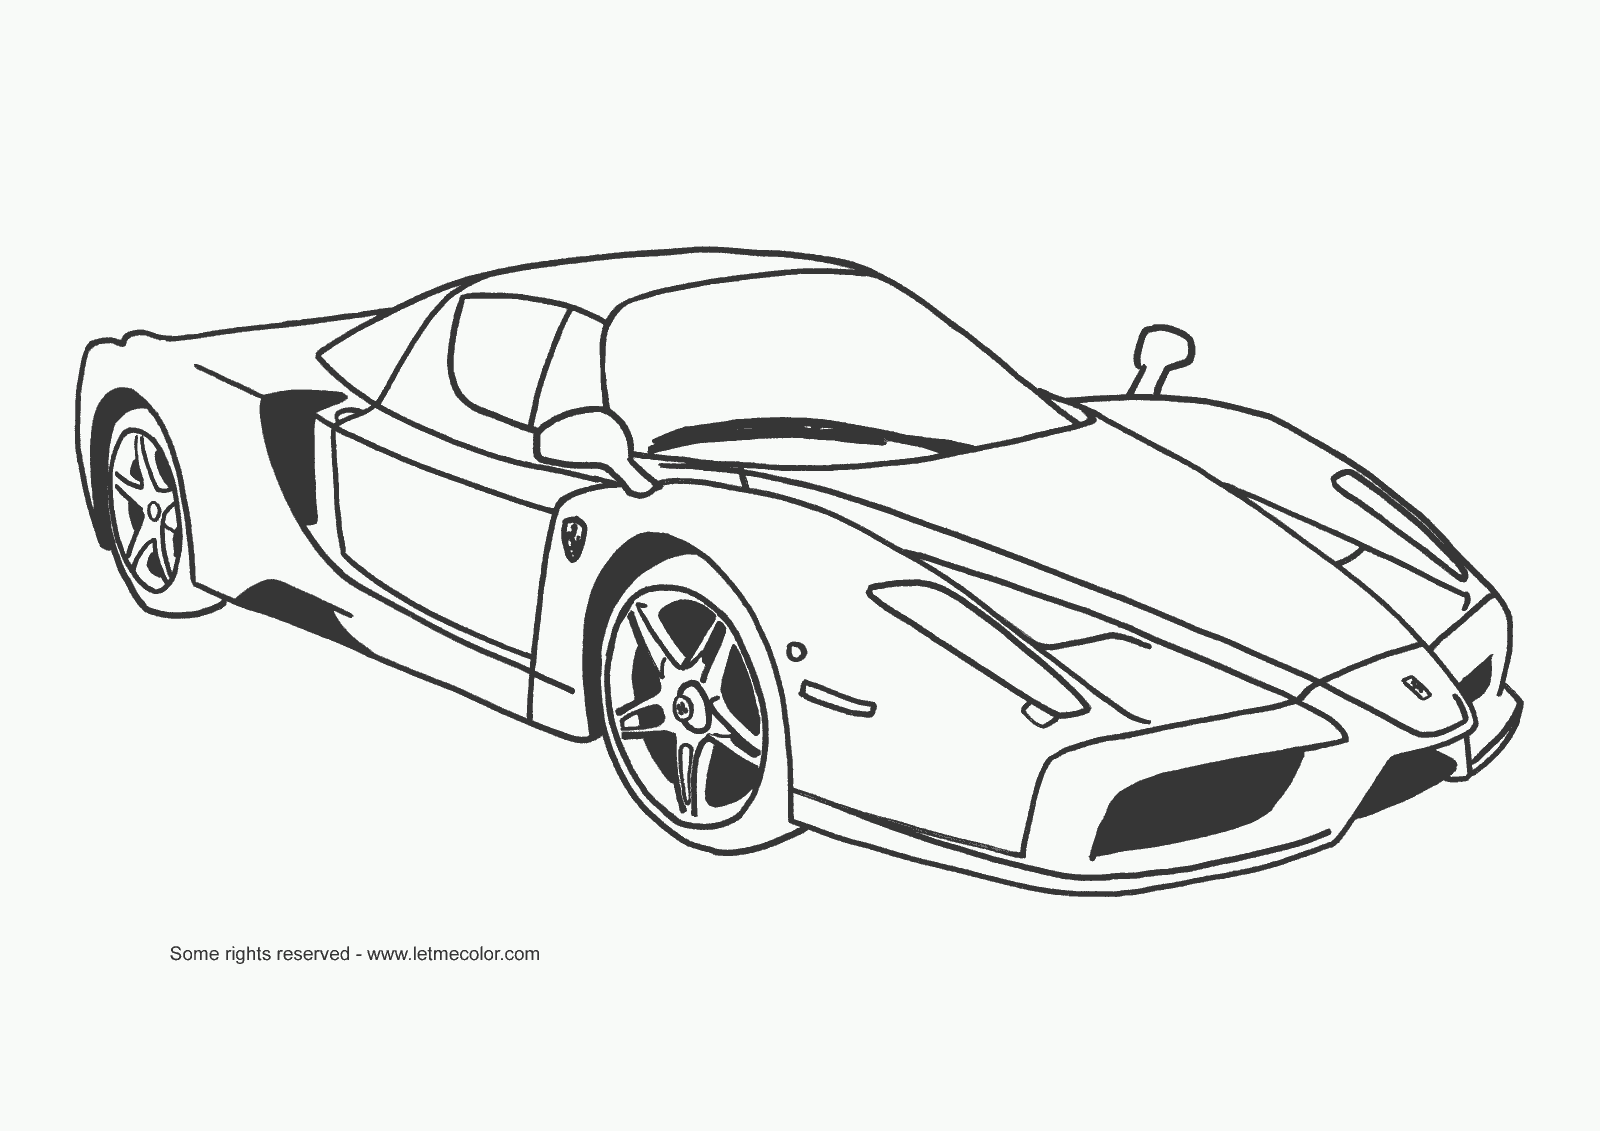 coloring pages sports cars coloring pages sports cars to print free coloring sheets coloring sports pages cars 